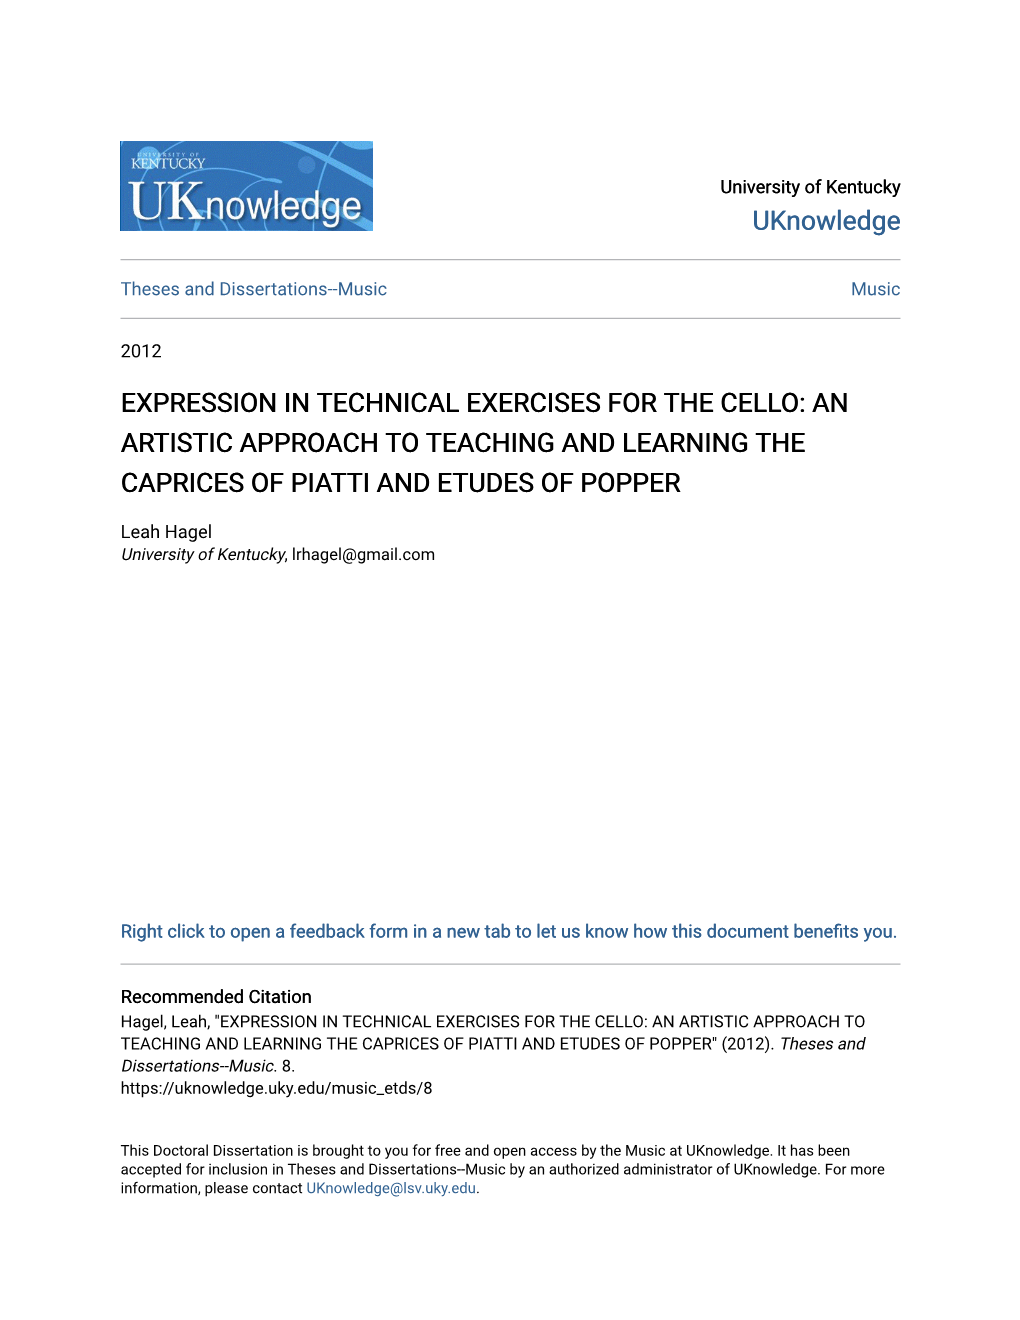 Expression in Technical Exercises for the Cello: an Artistic Approach to Teaching and Learning the Caprices of Piatti and Etudes of Popper